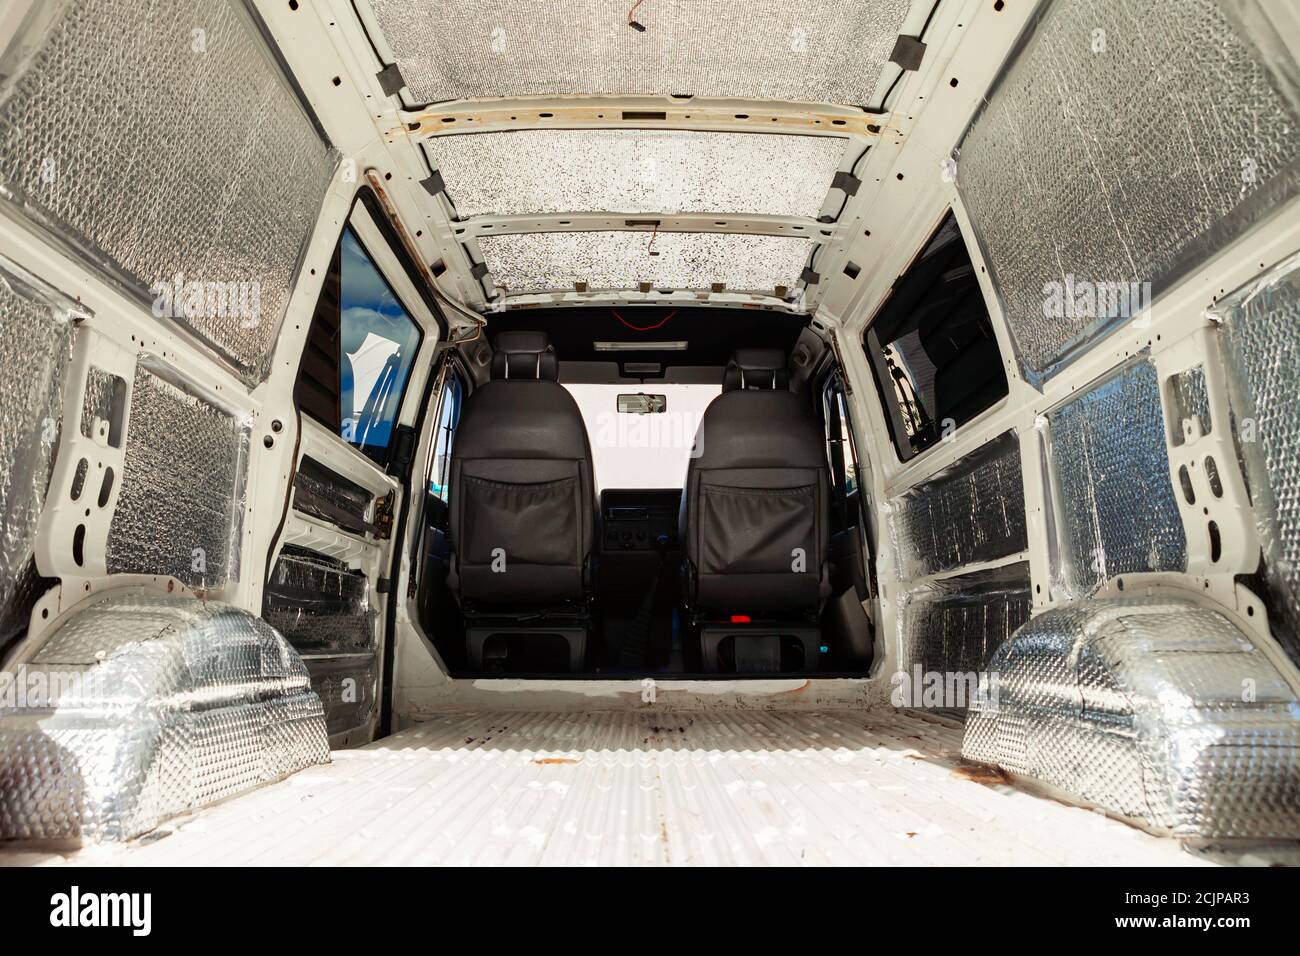 Conversion of a t4 van into a camper van.. Soundproofing and insulation  have been added to the van ready for carpeting Stock Photo - Alamy